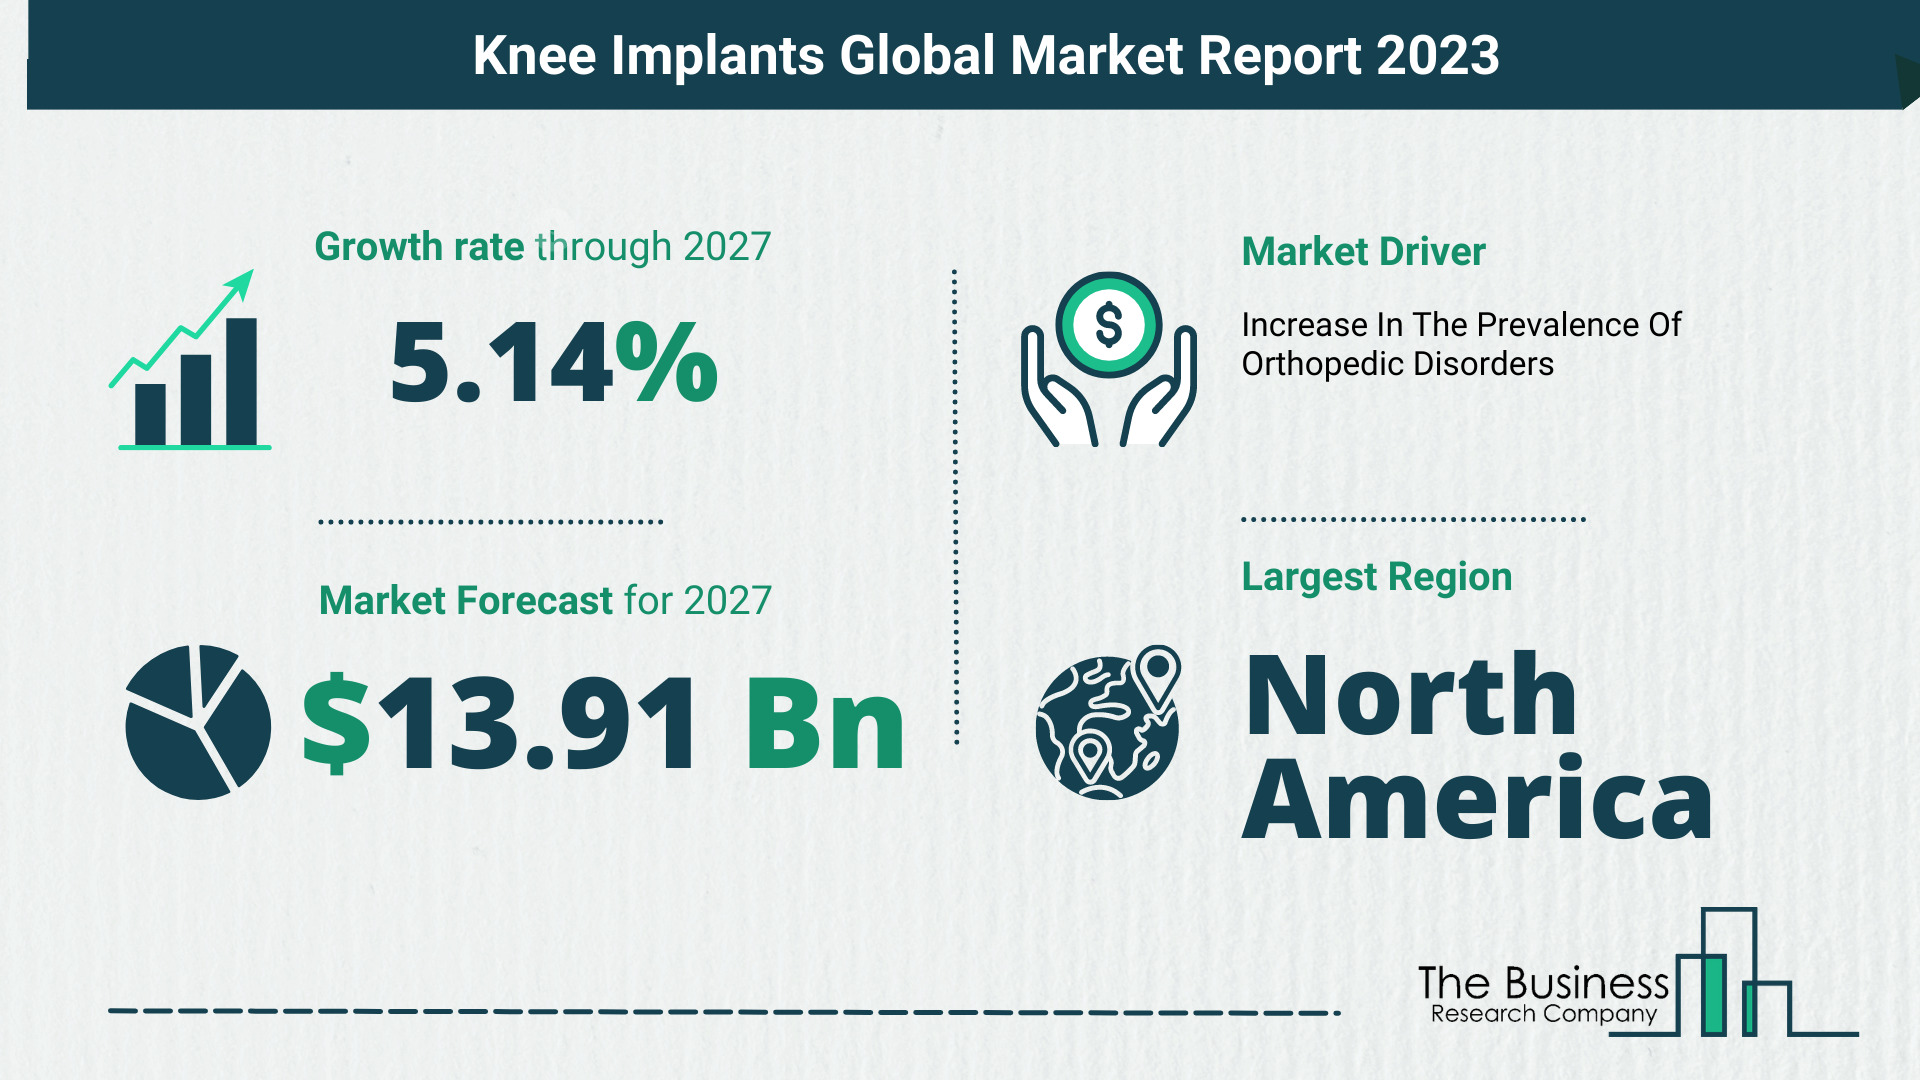 How Will The Knee Implants Market Globally Expand In 2023?